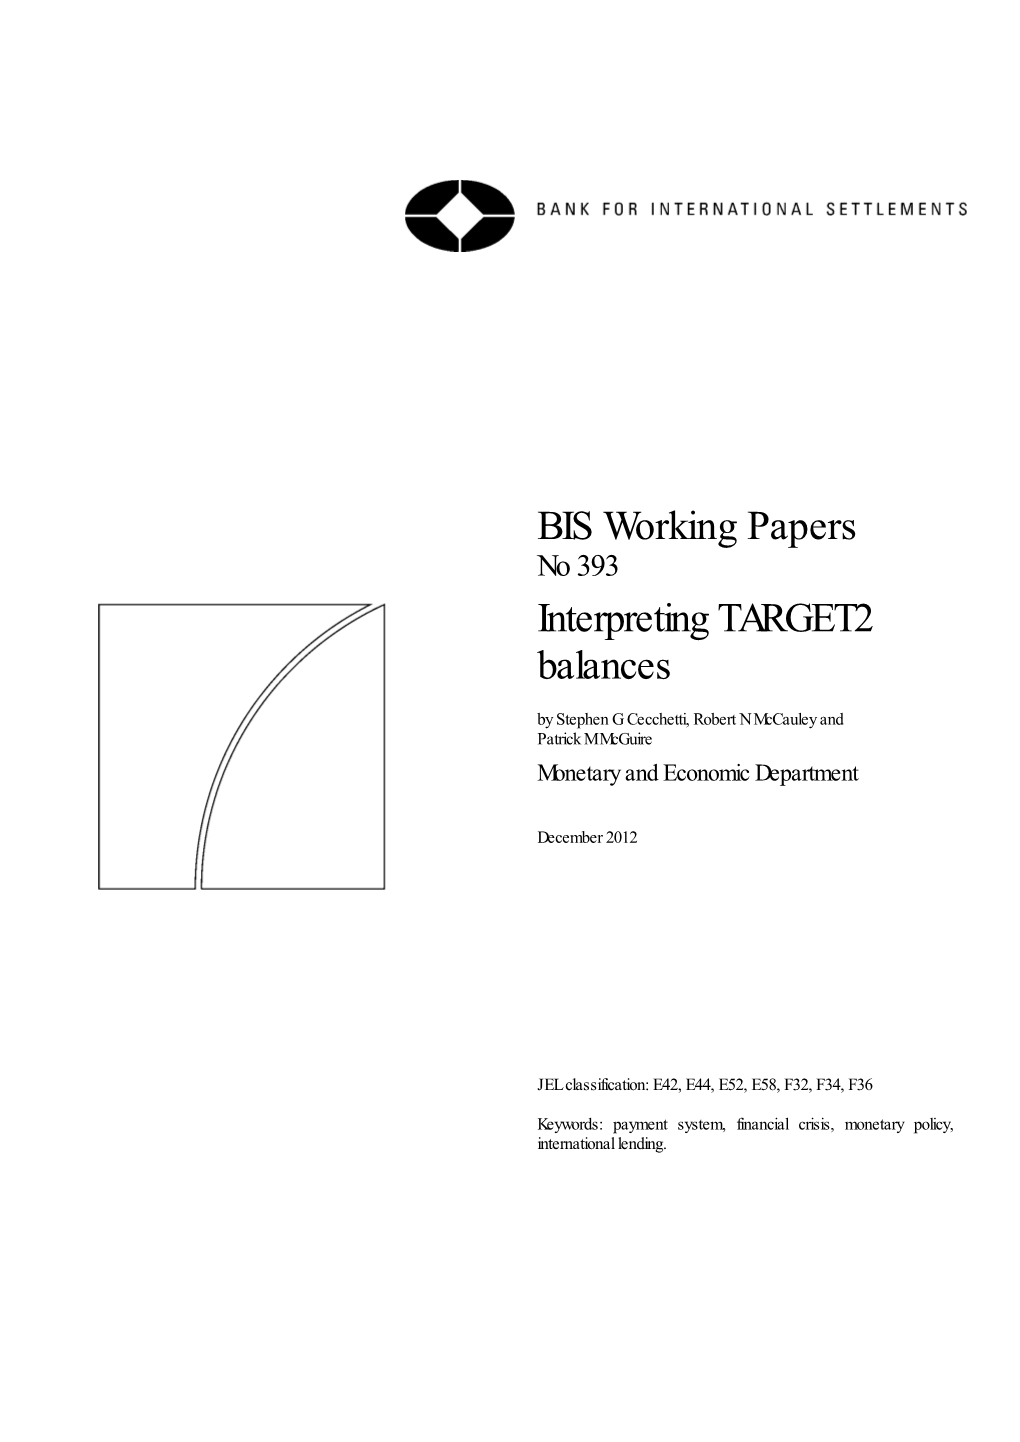 BIS Working Papers No 393 Interpreting TARGET2 Balances by Stephen G Cecchetti, Robert N Mccauley and Patrick M Mcguire Monetary and Economic Department